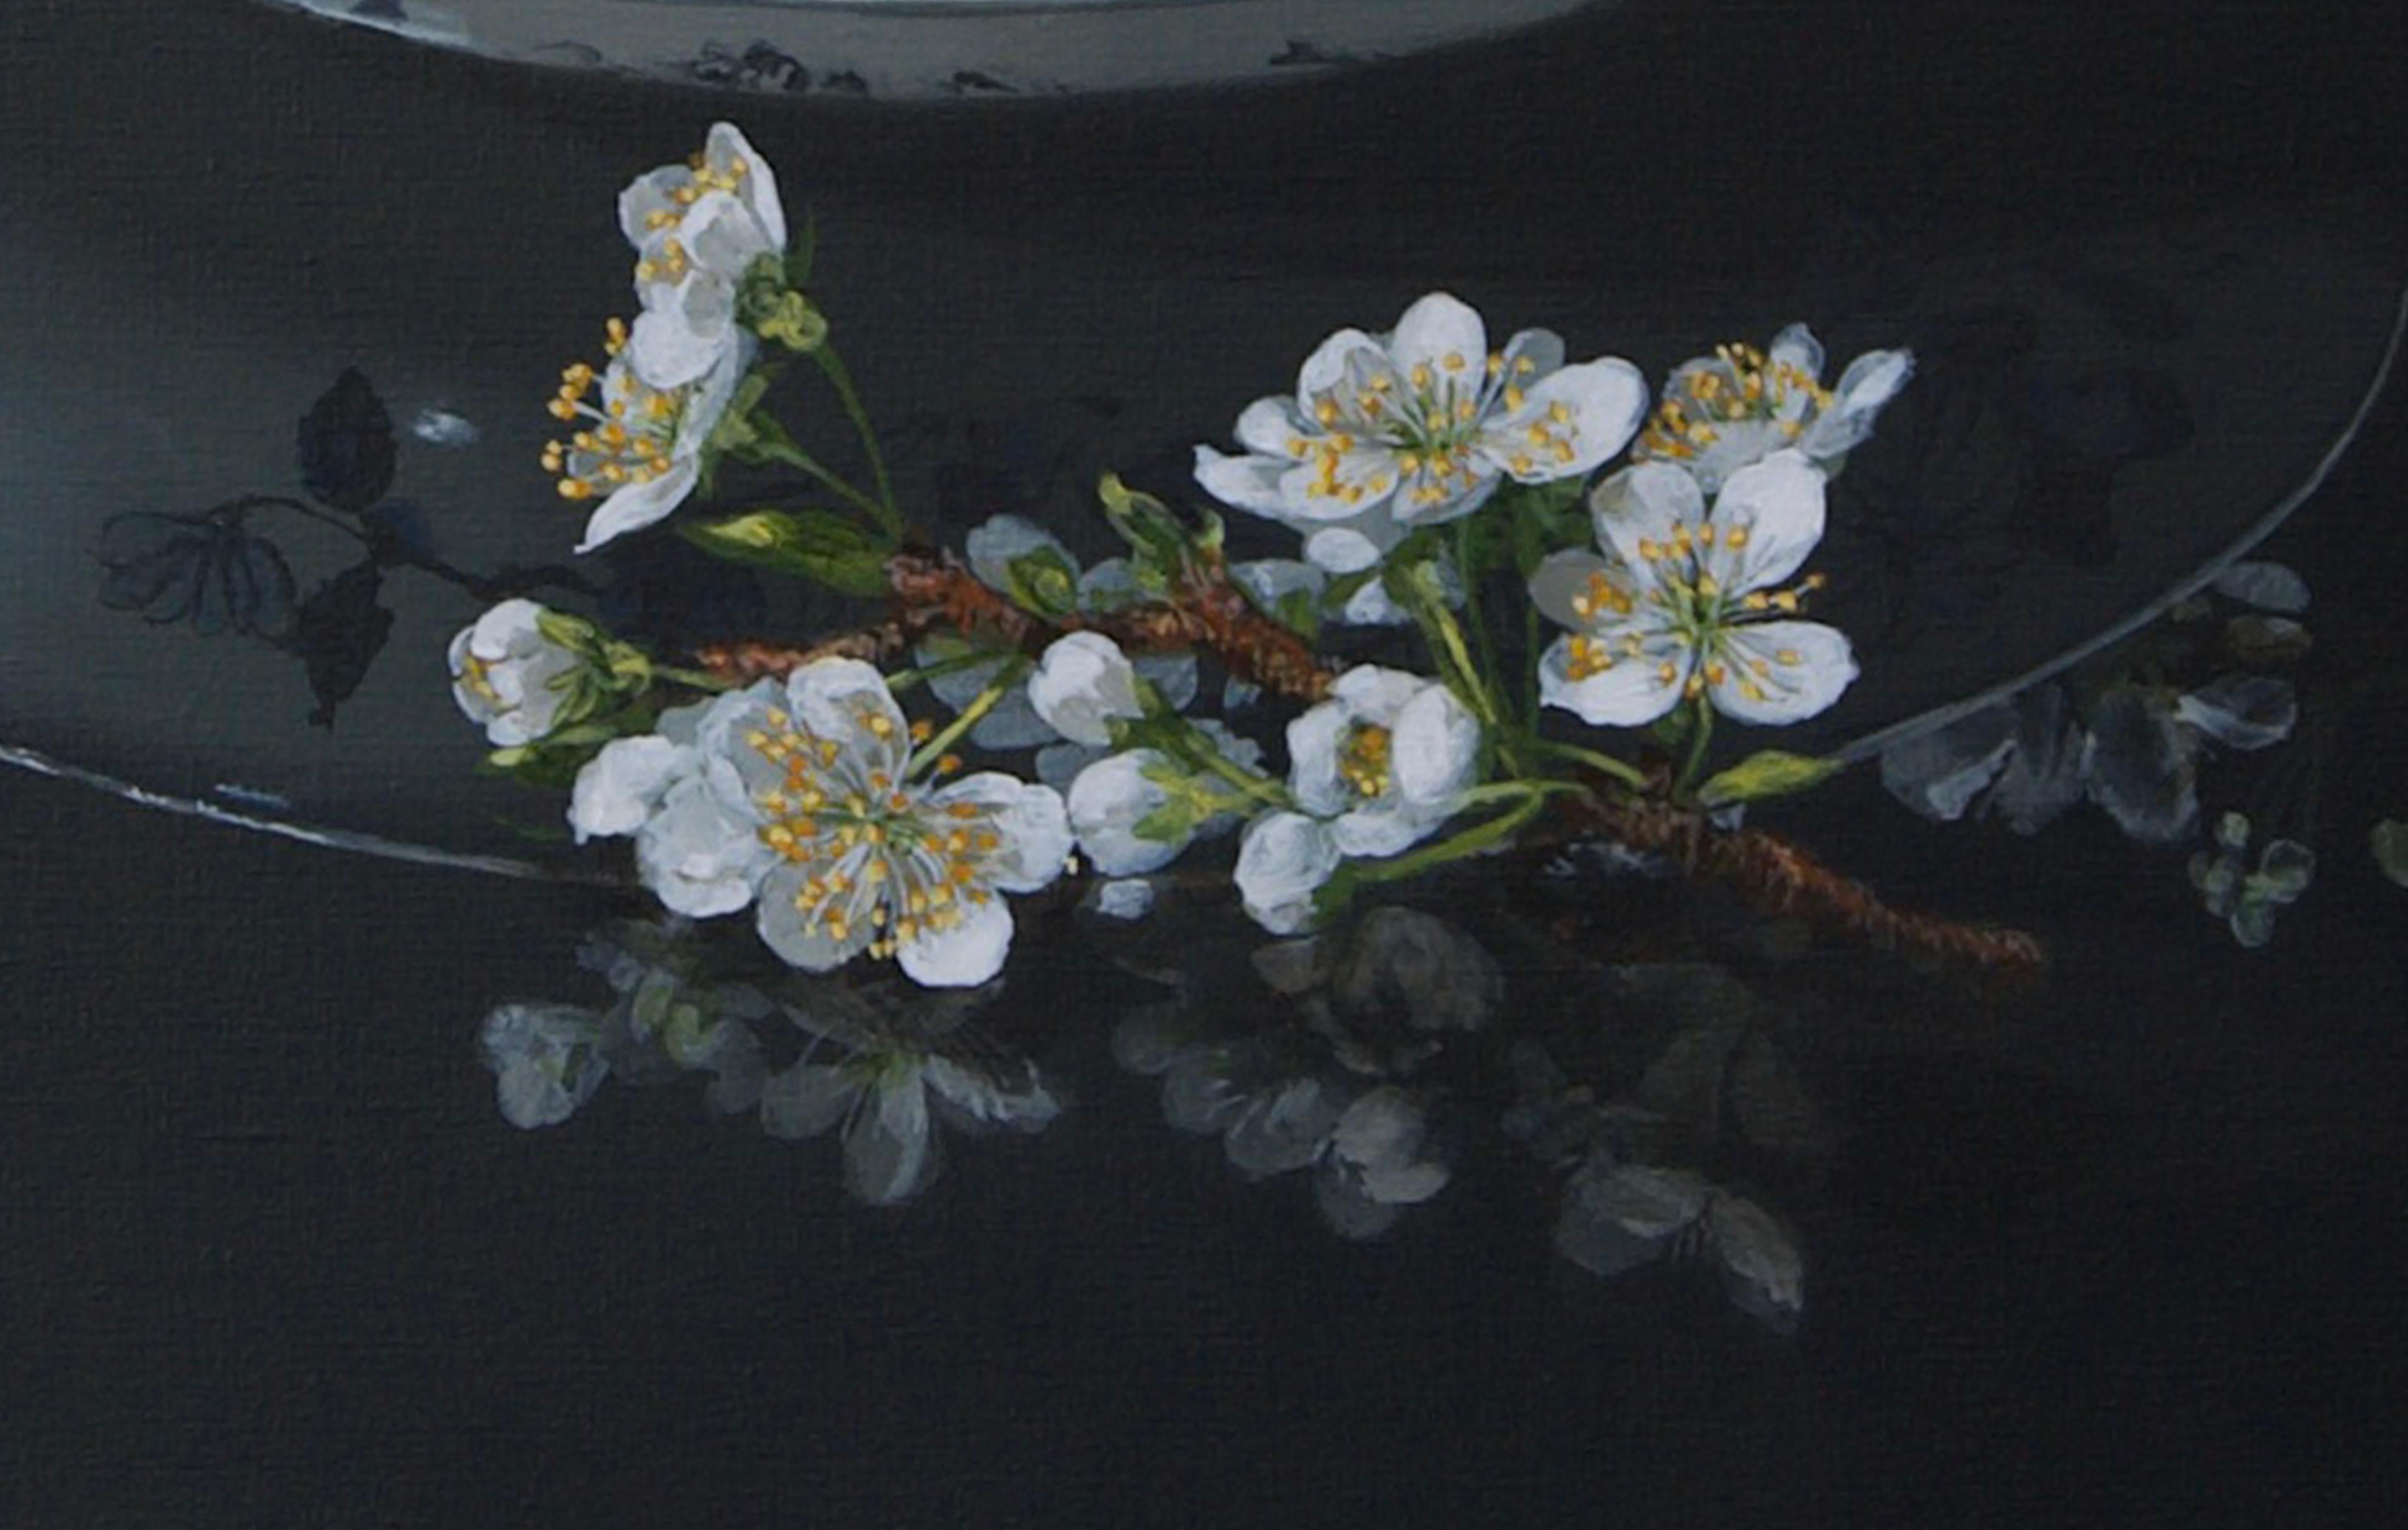 ''Pear Blossom'', Dutch Contemporary Still Life with Porcelain and White Blossom - Painting by Sasja Wagenaar